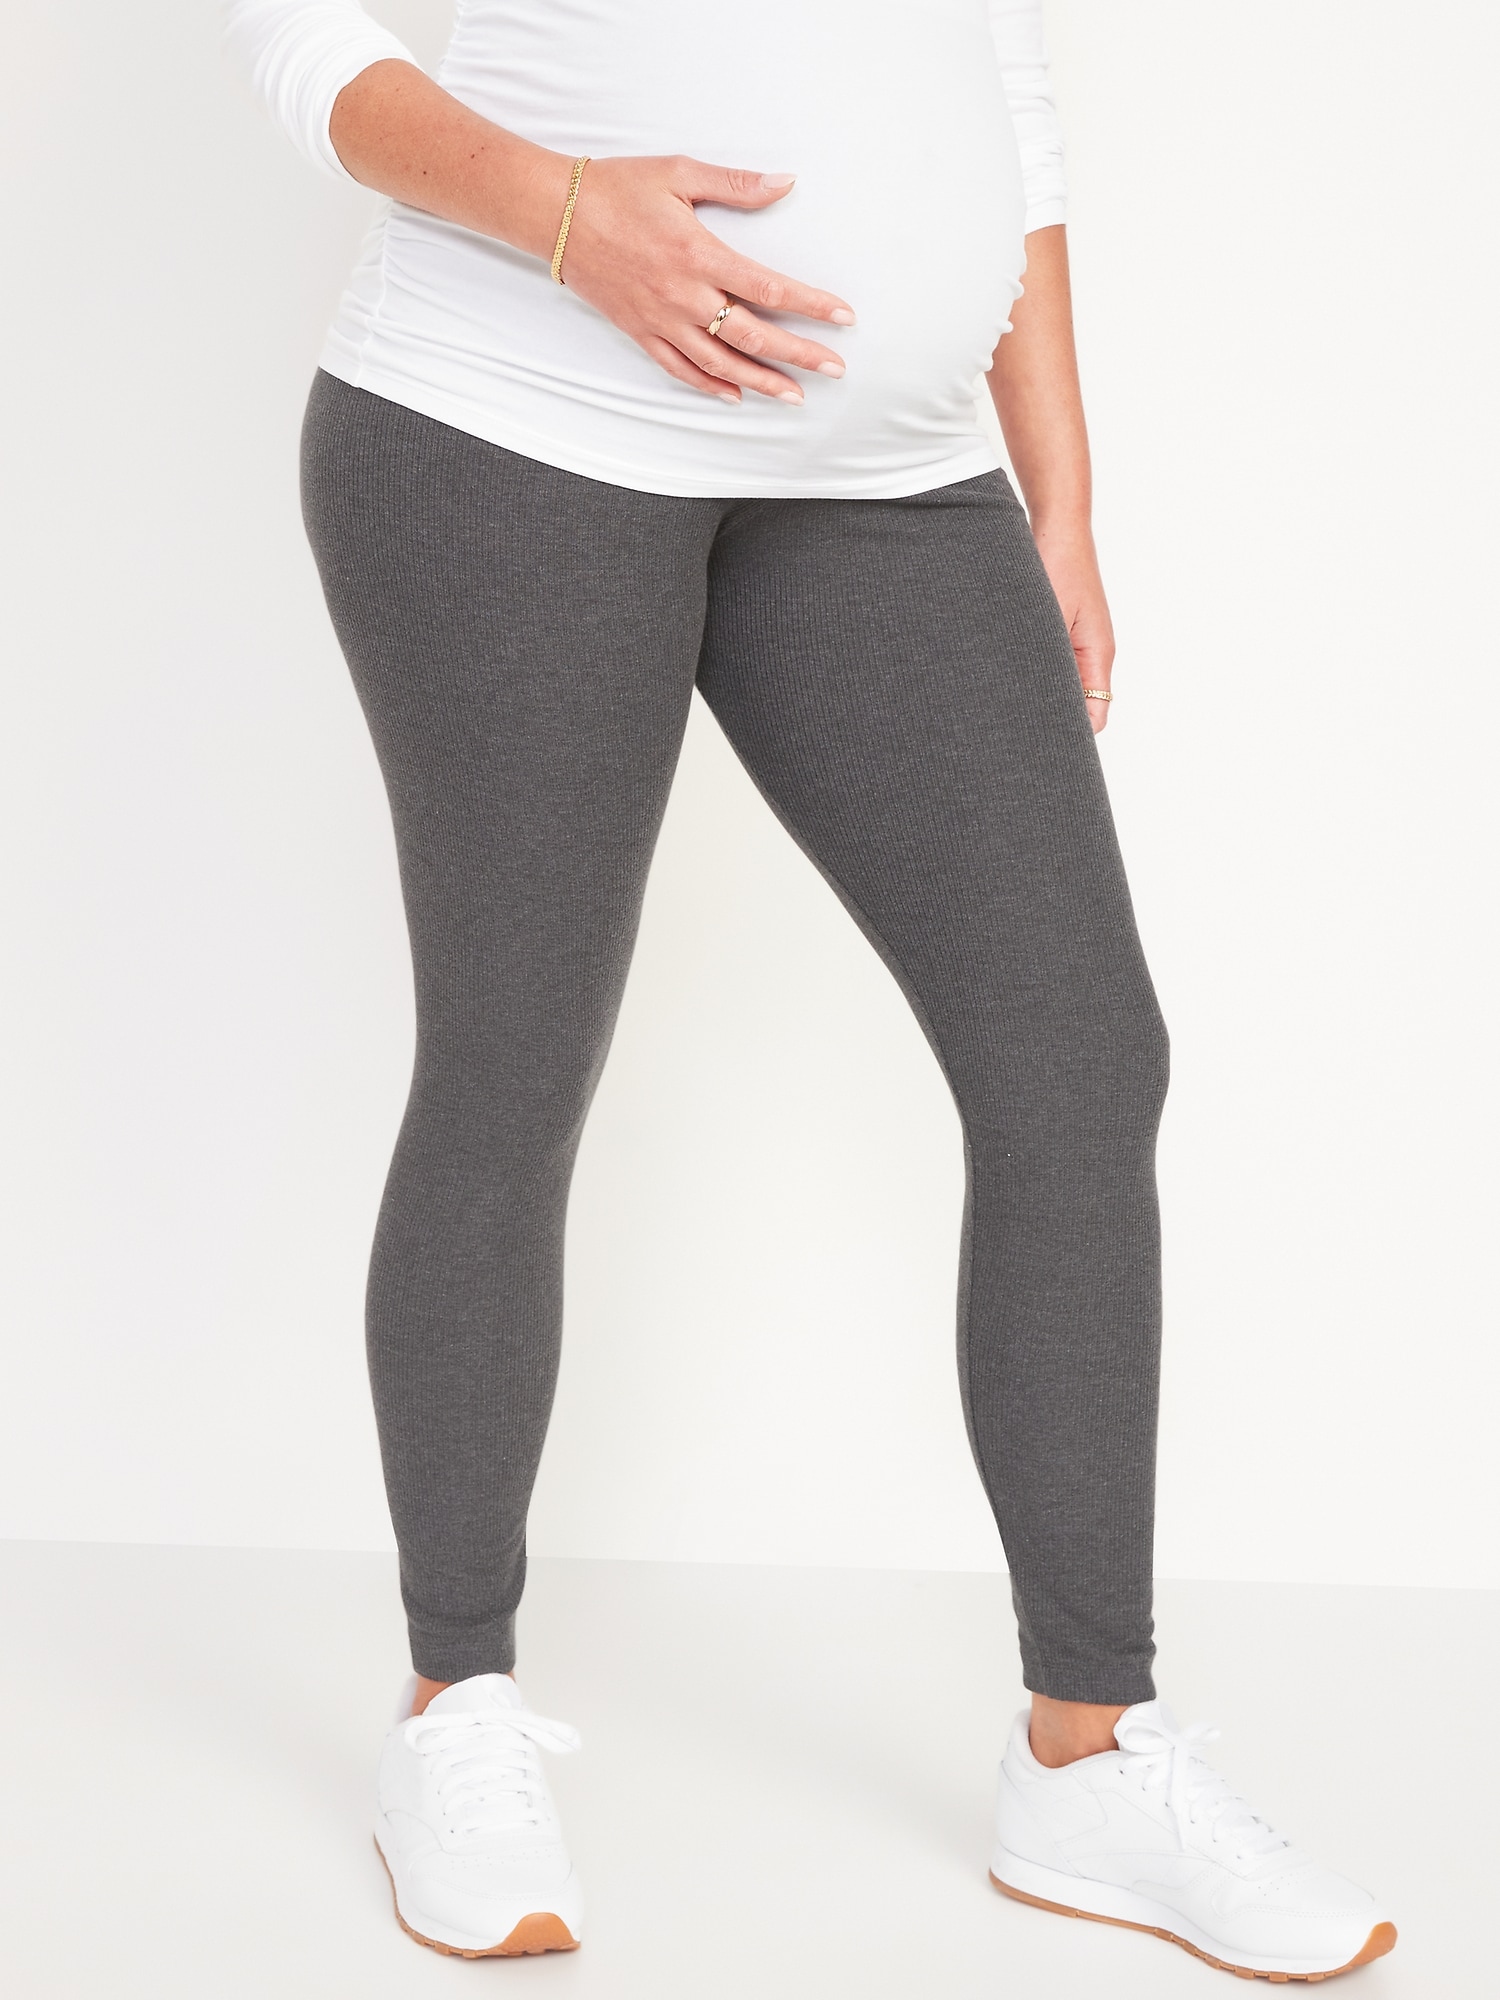 Prismatic One More Rep Leggings Grey - AmrapPro